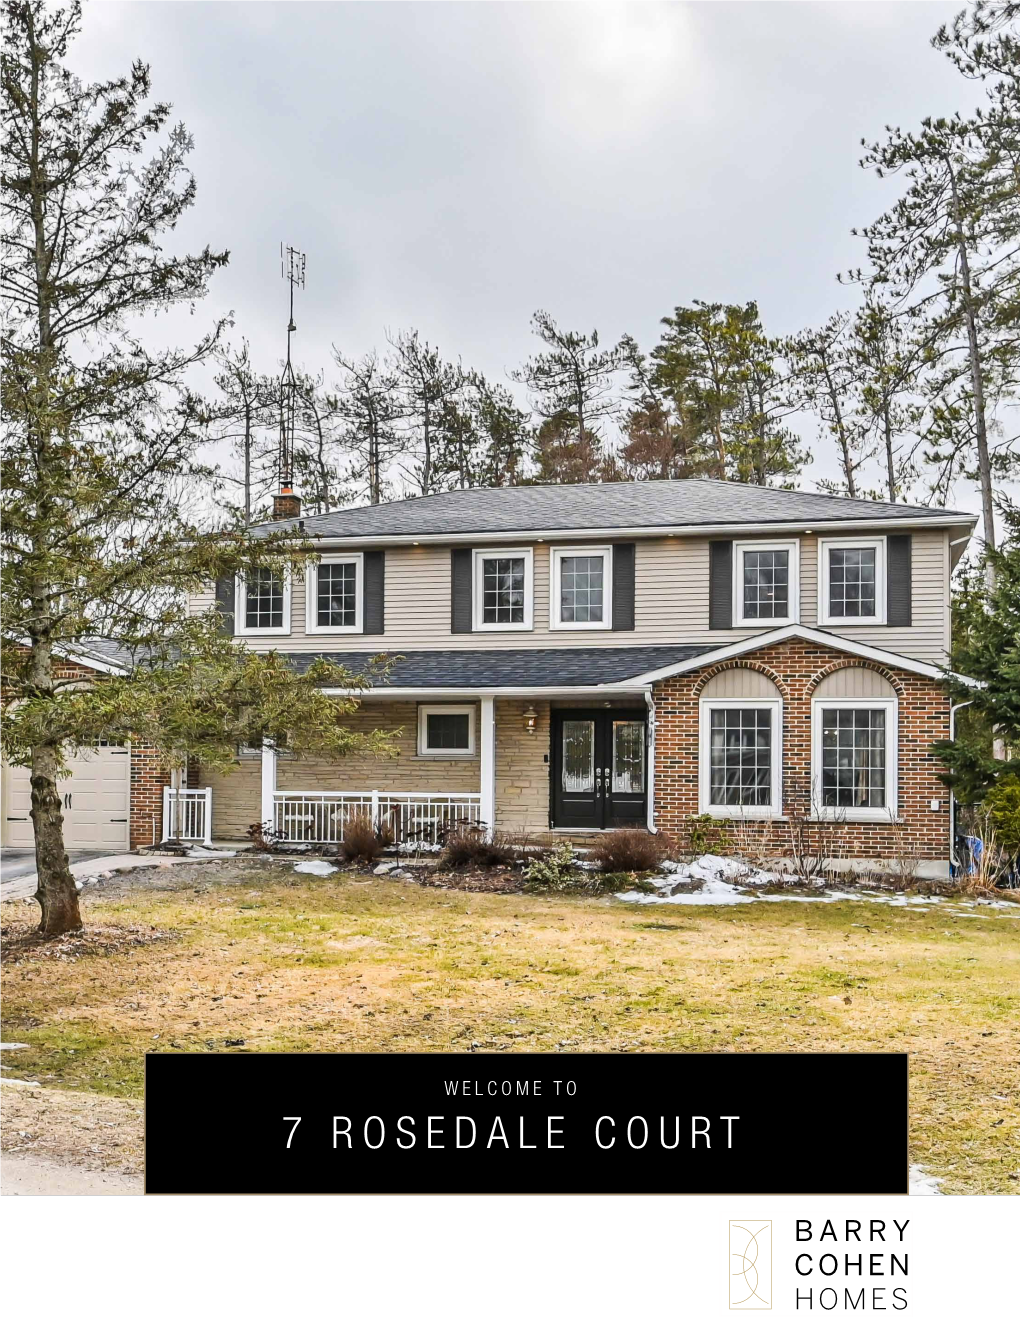 7 ROSEDALE COURT Outstanding Newly Renovated Home Situated on an Breathtaking 3/4 Acre Lot Surrounded by Mature Trees & Lush Grounds